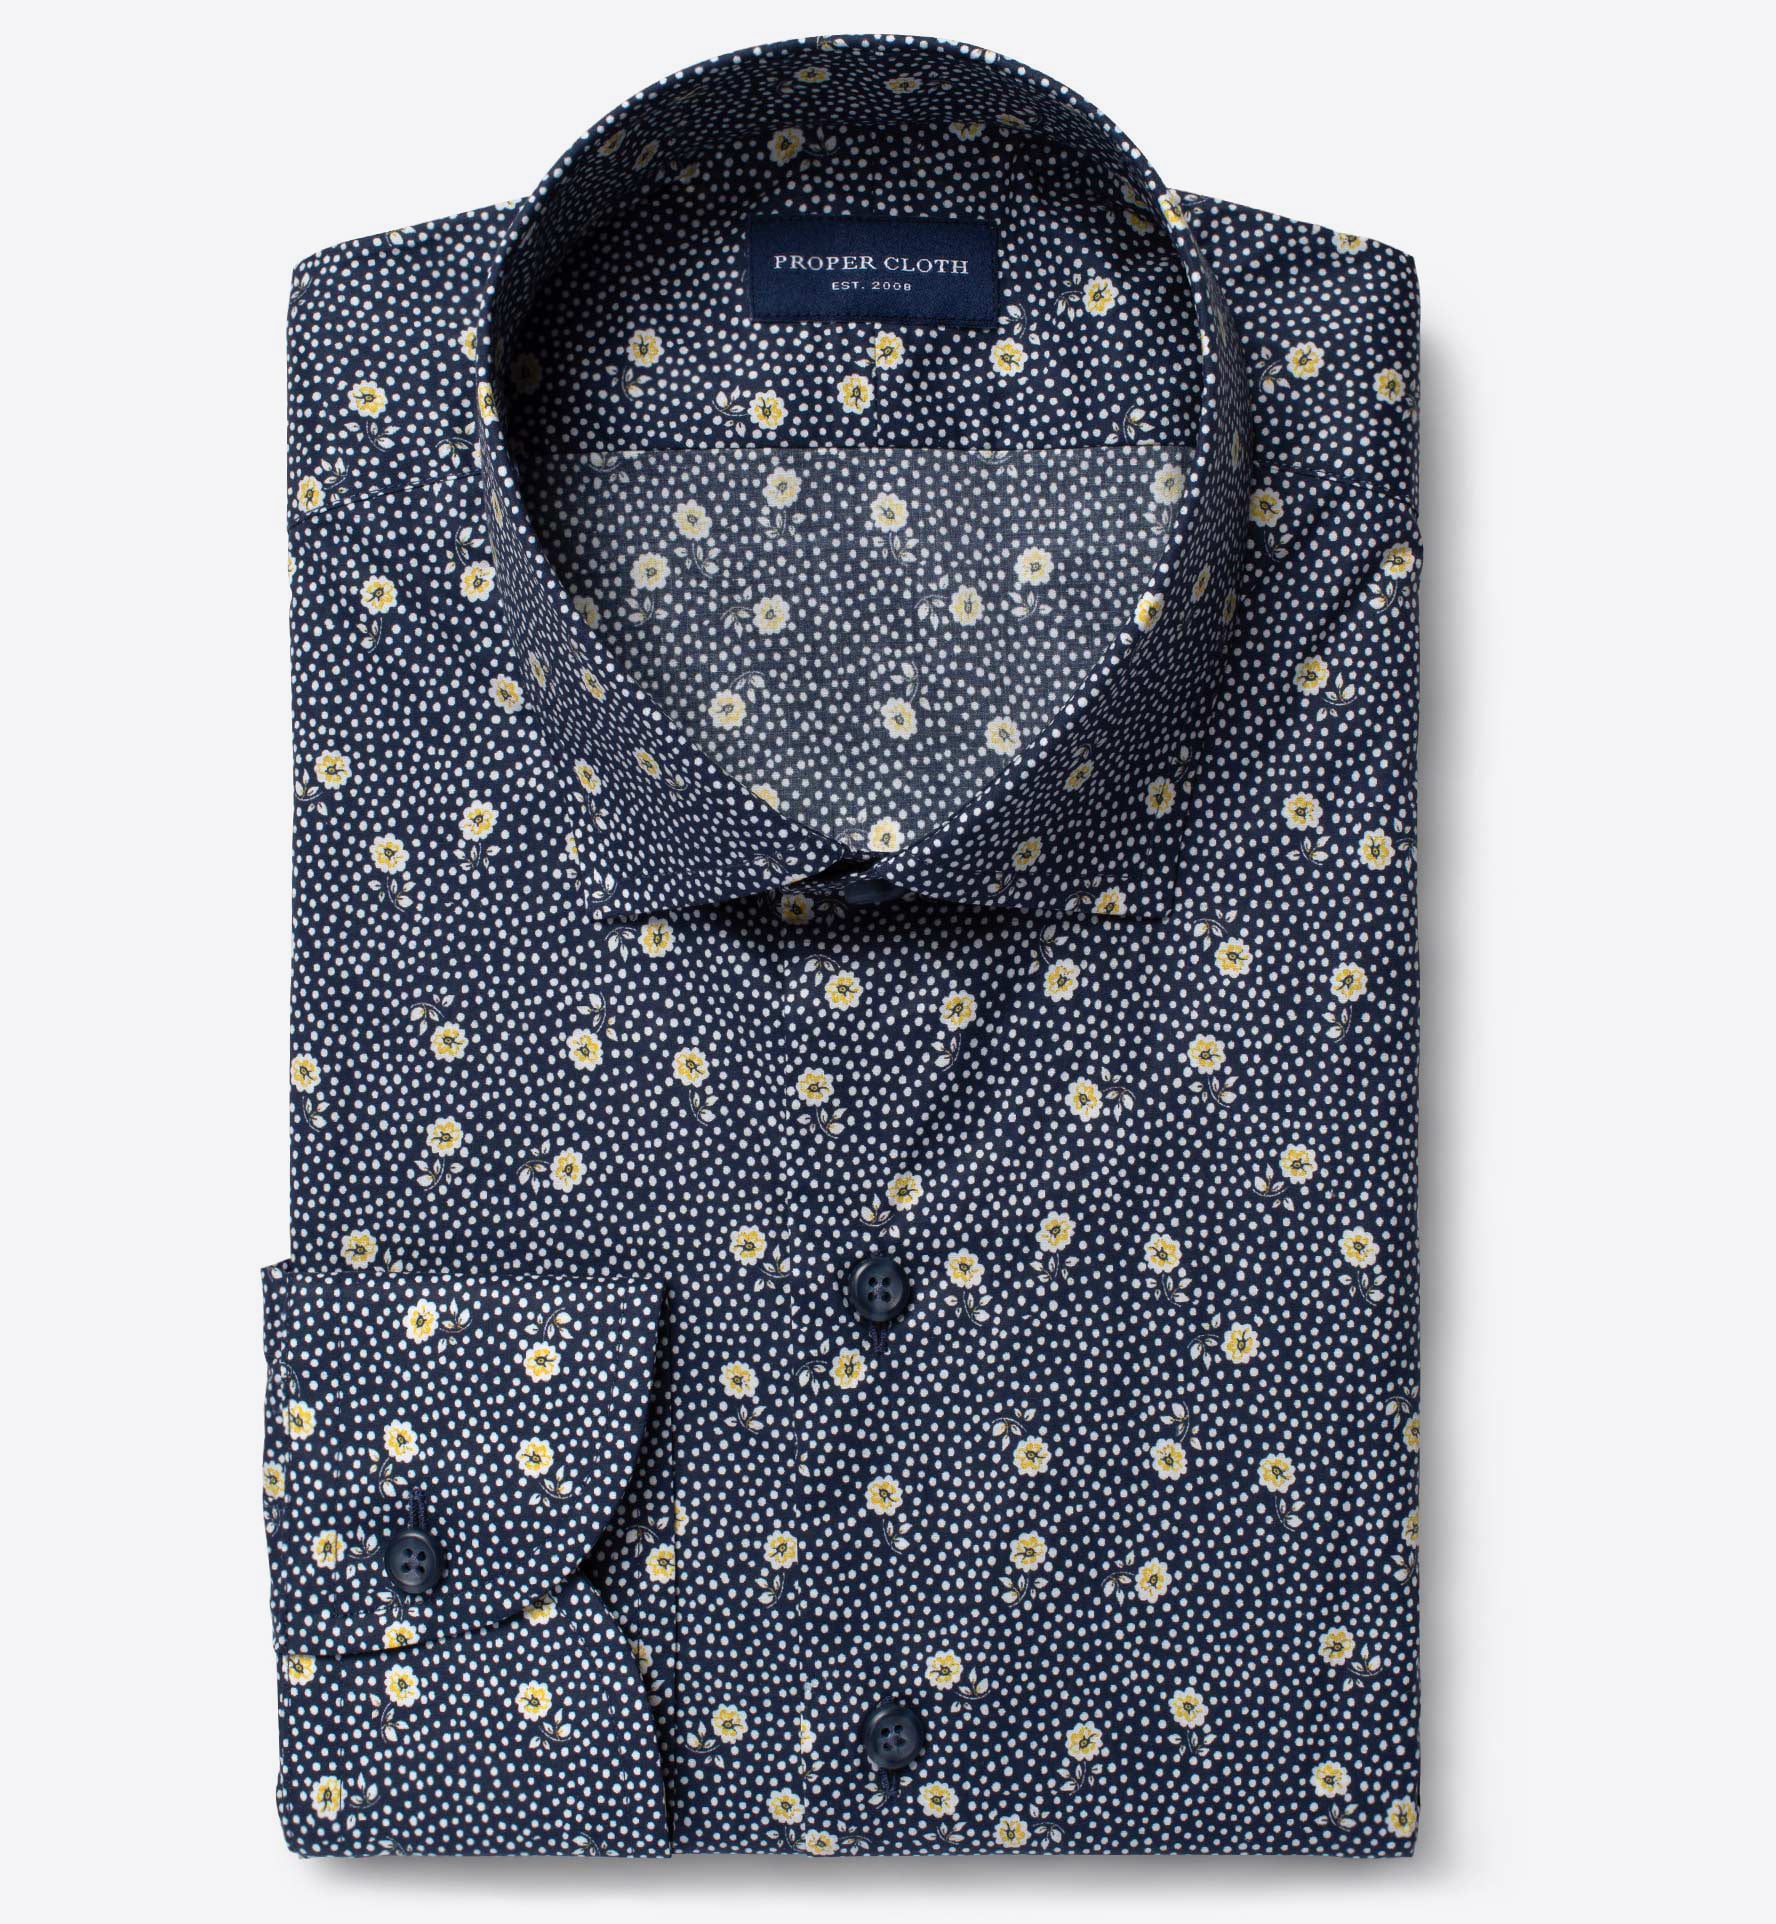 Albini Navy and Yellow Floral Print Custom Dress Shirt by Proper Cloth